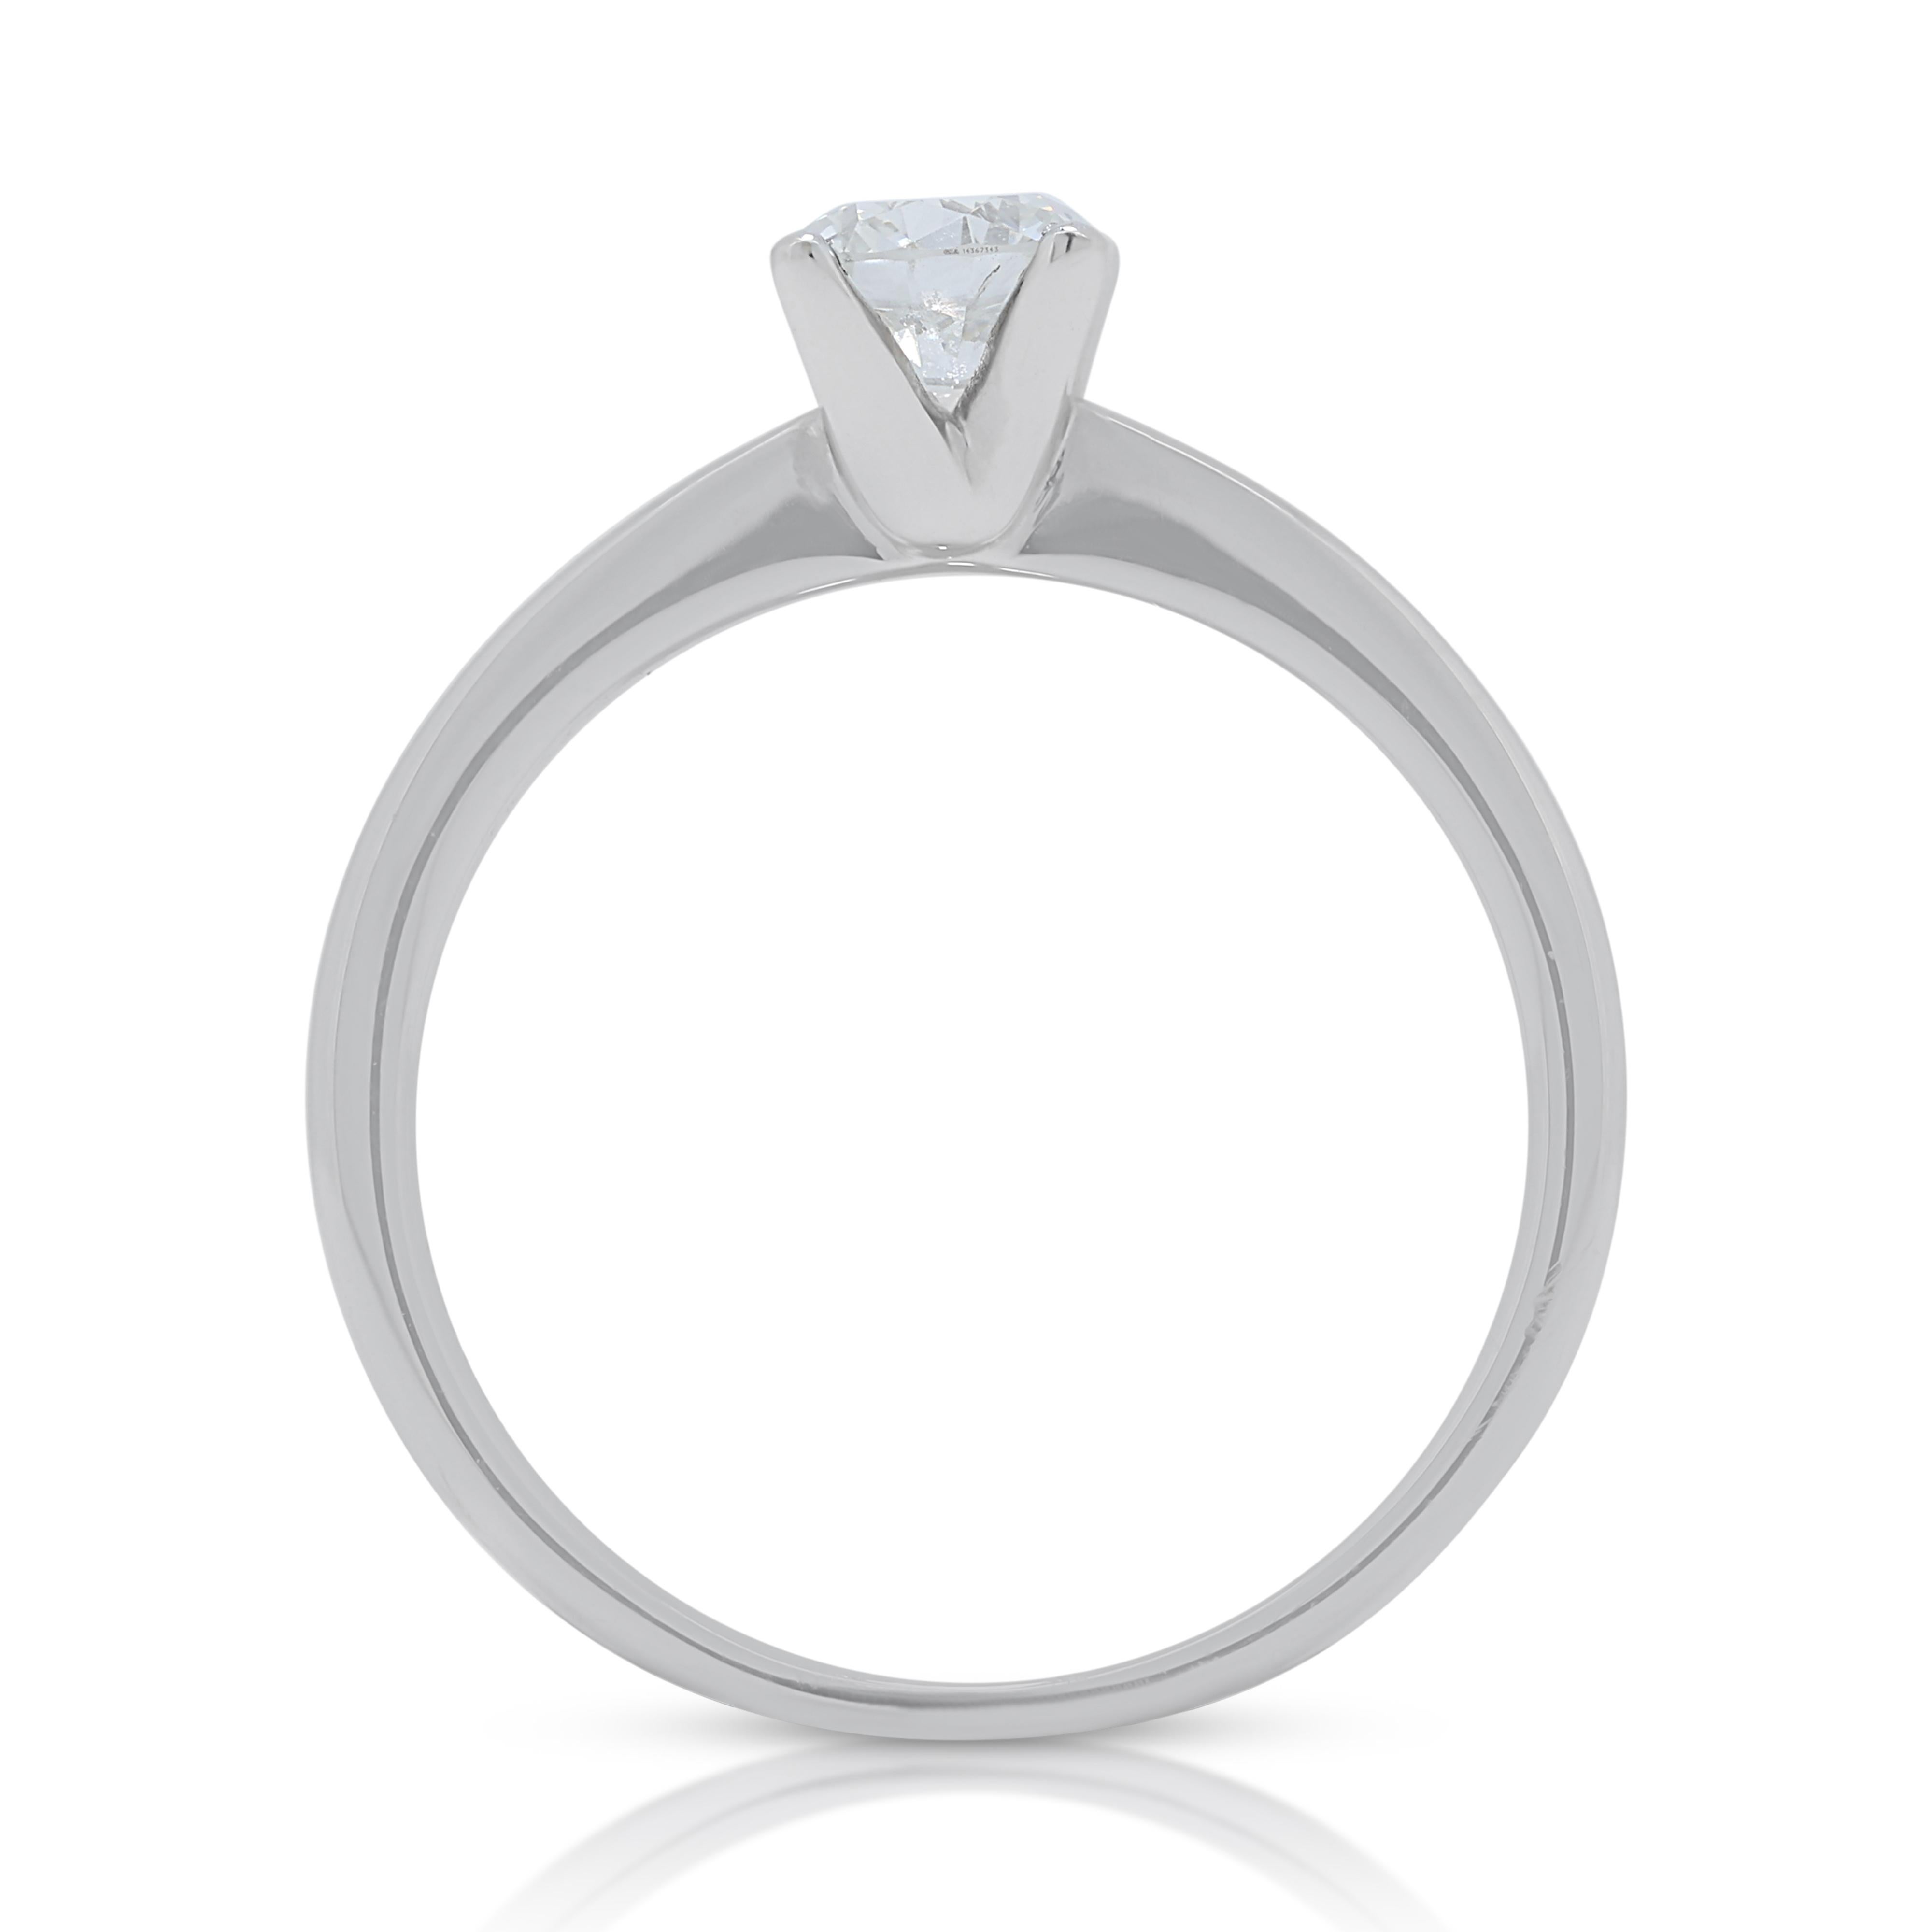 Timeless 0.32ct Diamond Solitaire Ring in 18K White Gold (Bague solitaire en or blanc 18 carats)  en vente 2